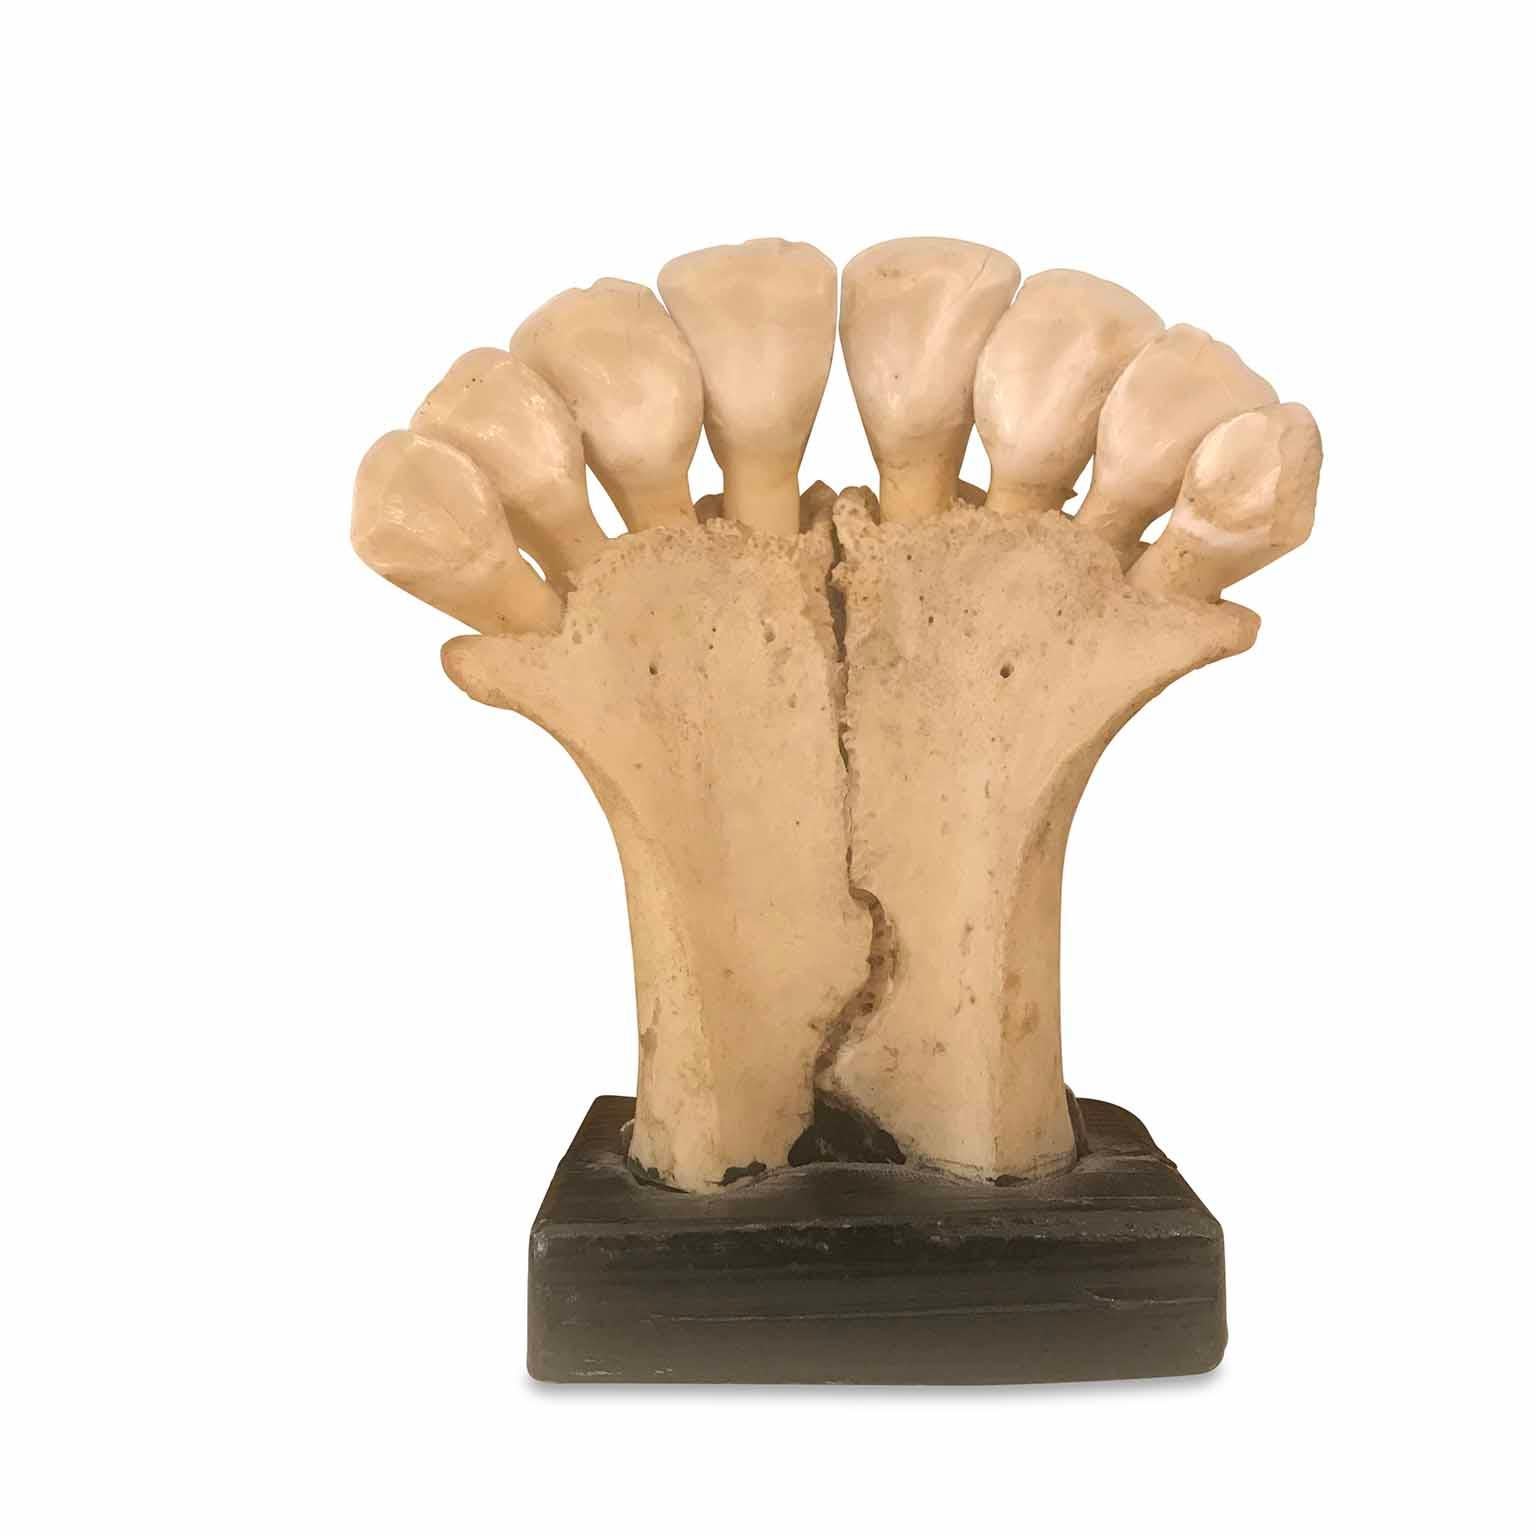 Anatomic Model of Animal Teeth, dating back to the early 20th century, mounted on a rectangular ebonized wooden base on which is anchored the bone fragment of a donkey (?) With its teeth. 
On the front an illegible inventory label. 
From an Italian